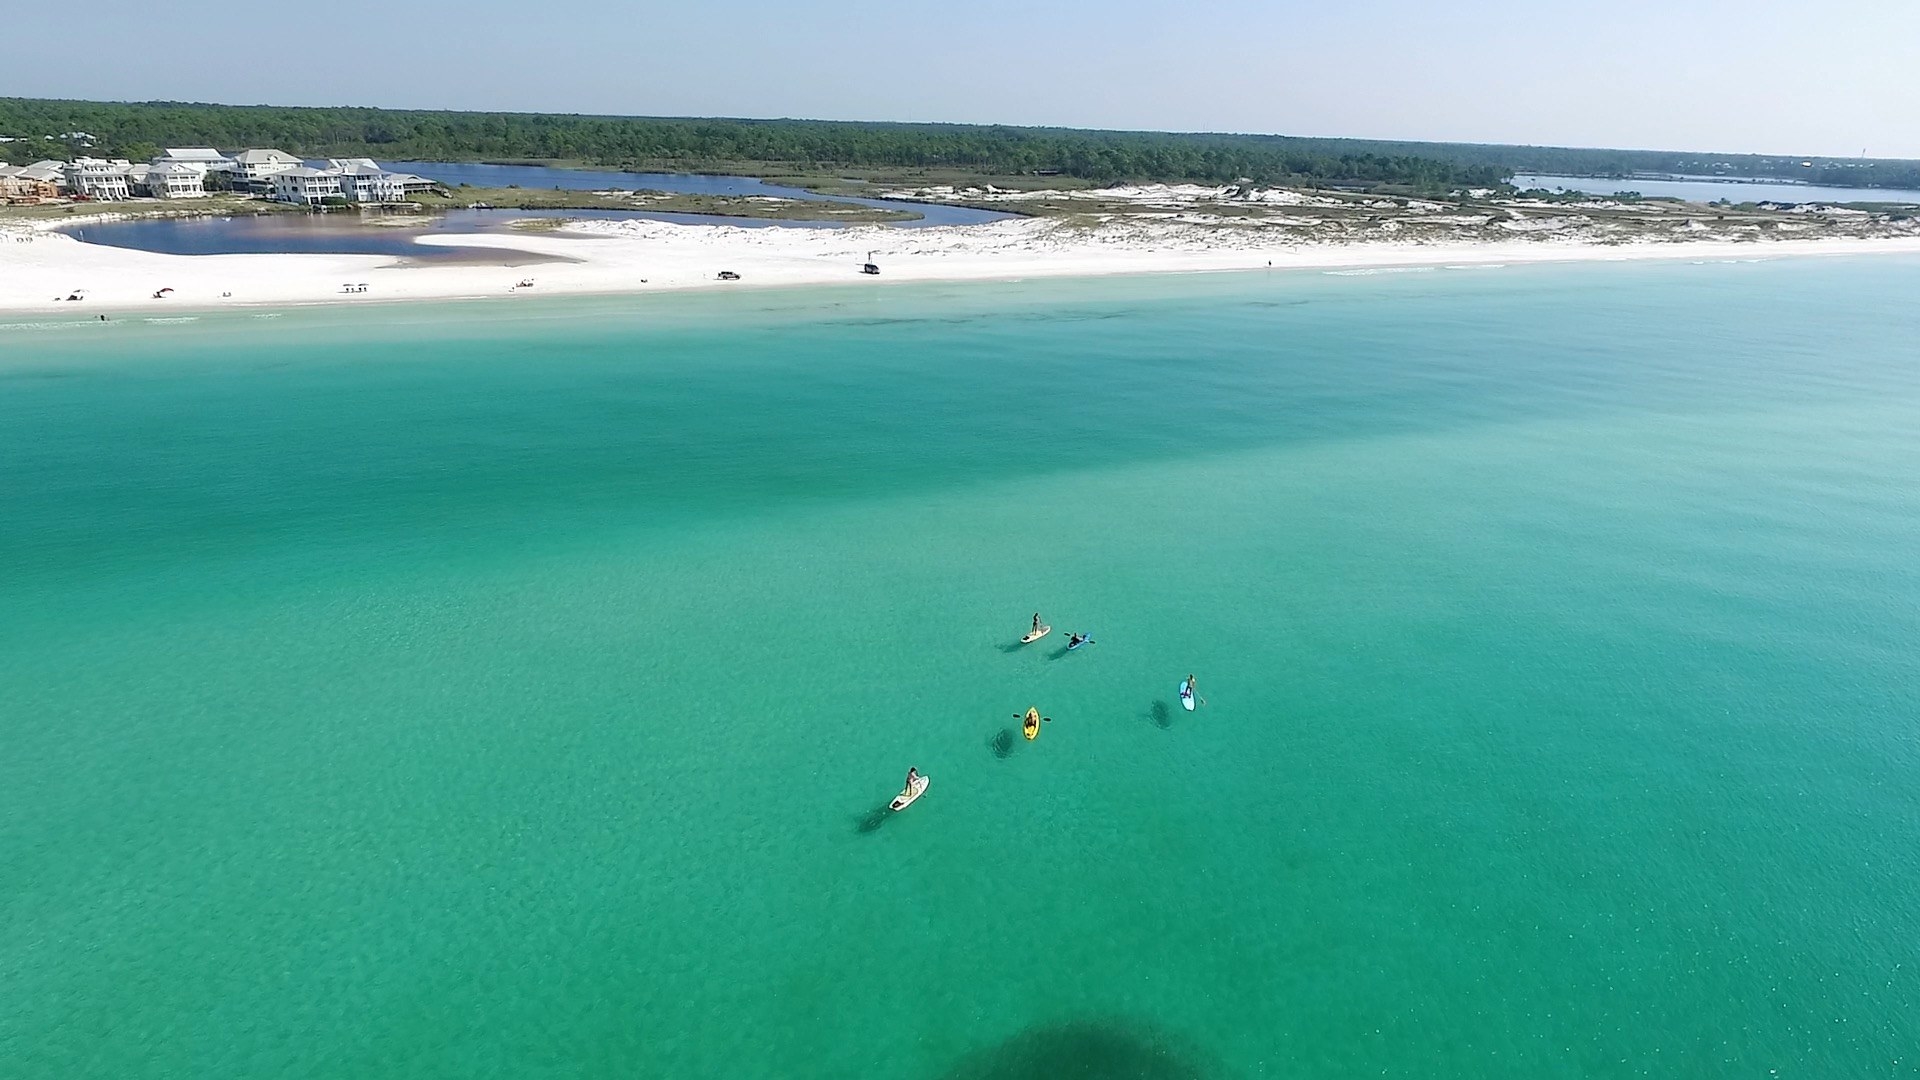 A group of people paddle-boarding far from the shore